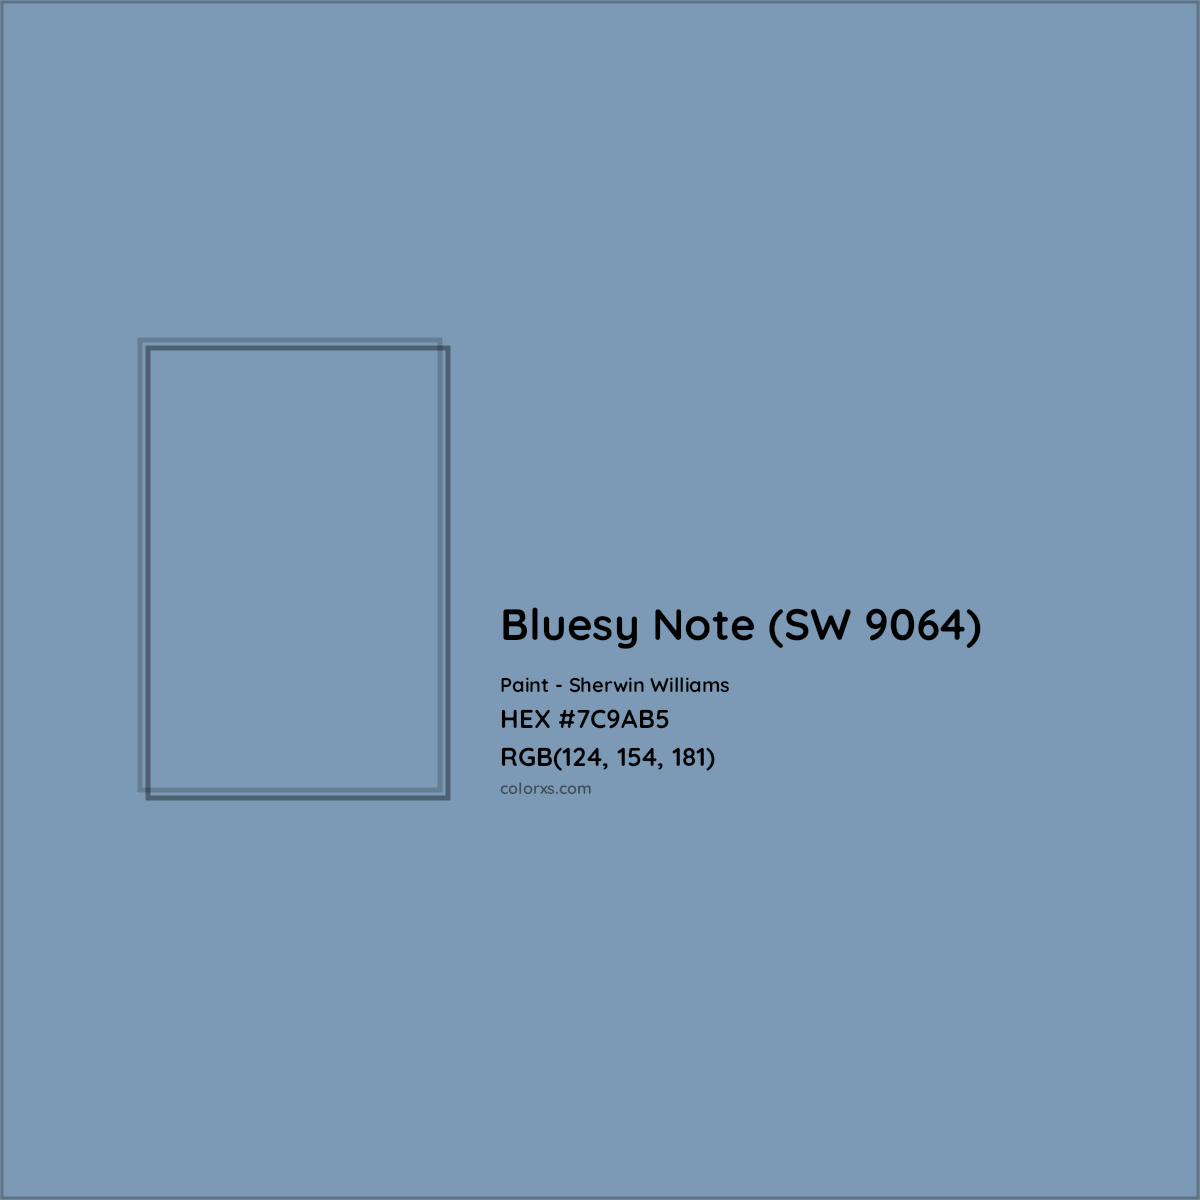 HEX #7C9AB5 Bluesy Note (SW 9064) Paint Sherwin Williams - Color Code